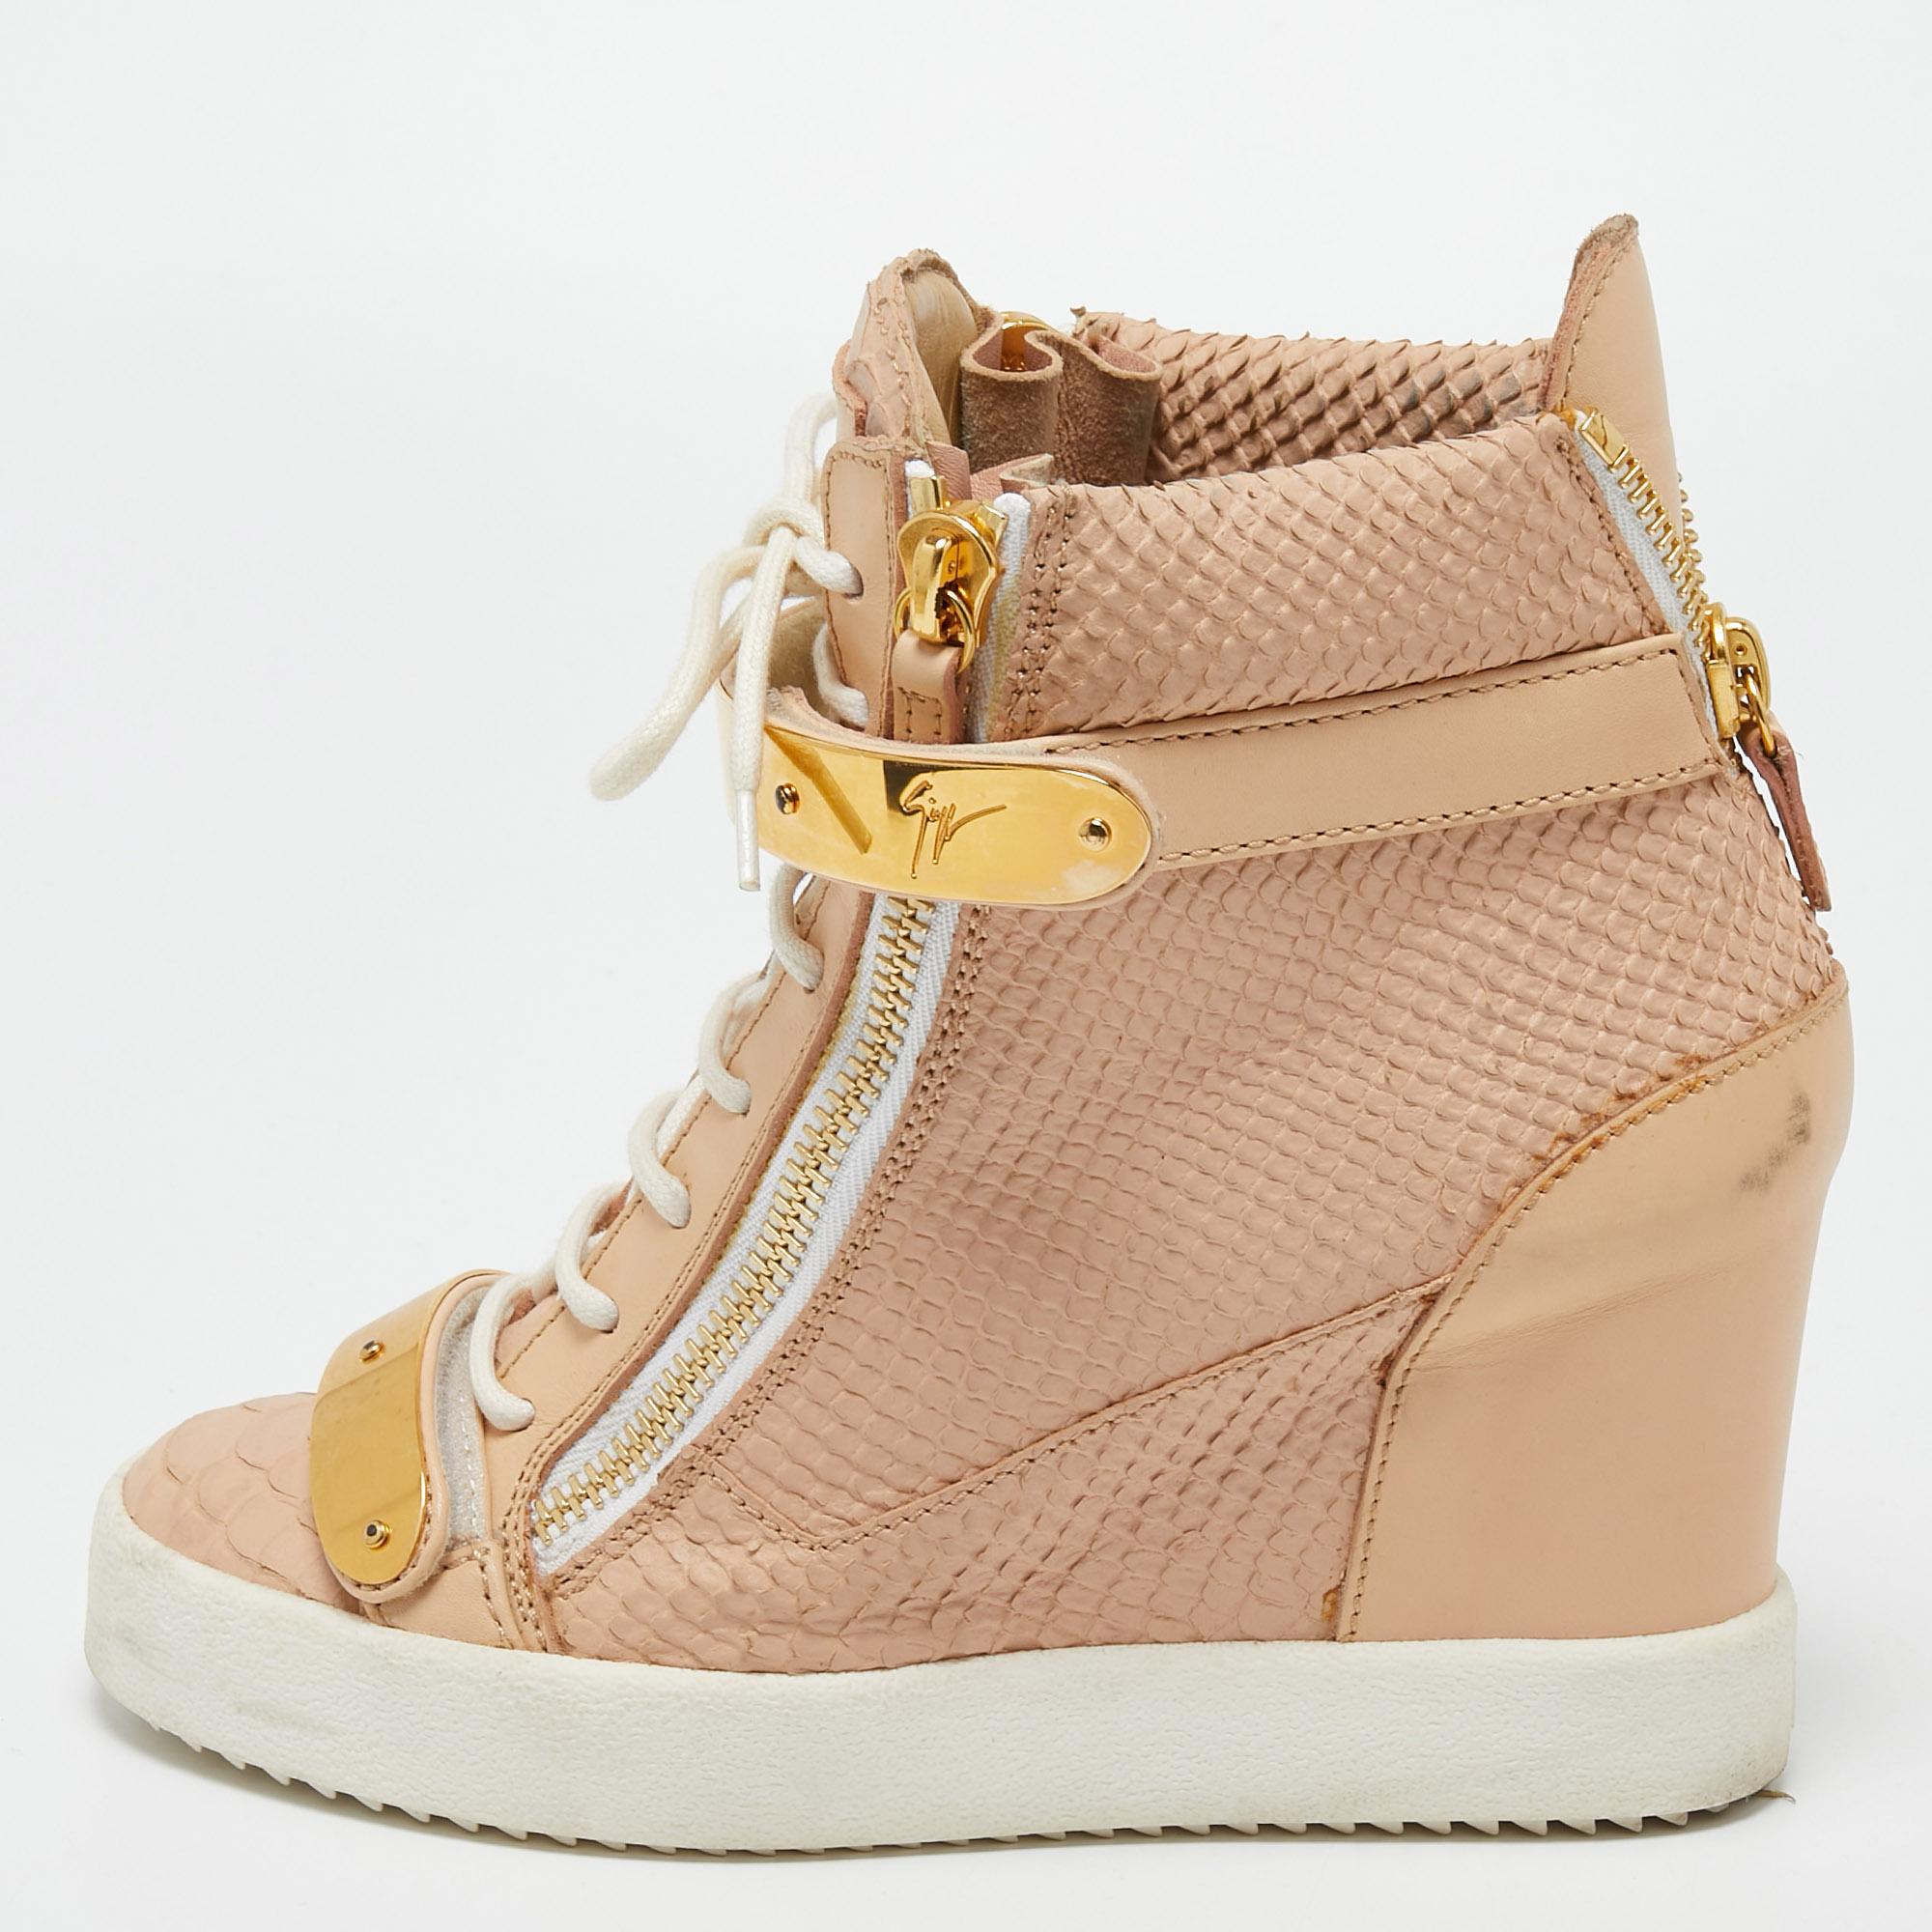 Pre-owned Giuseppe Zanotti Pink Python Embossed Leather Lorenz Wedge Sneakers Size 39